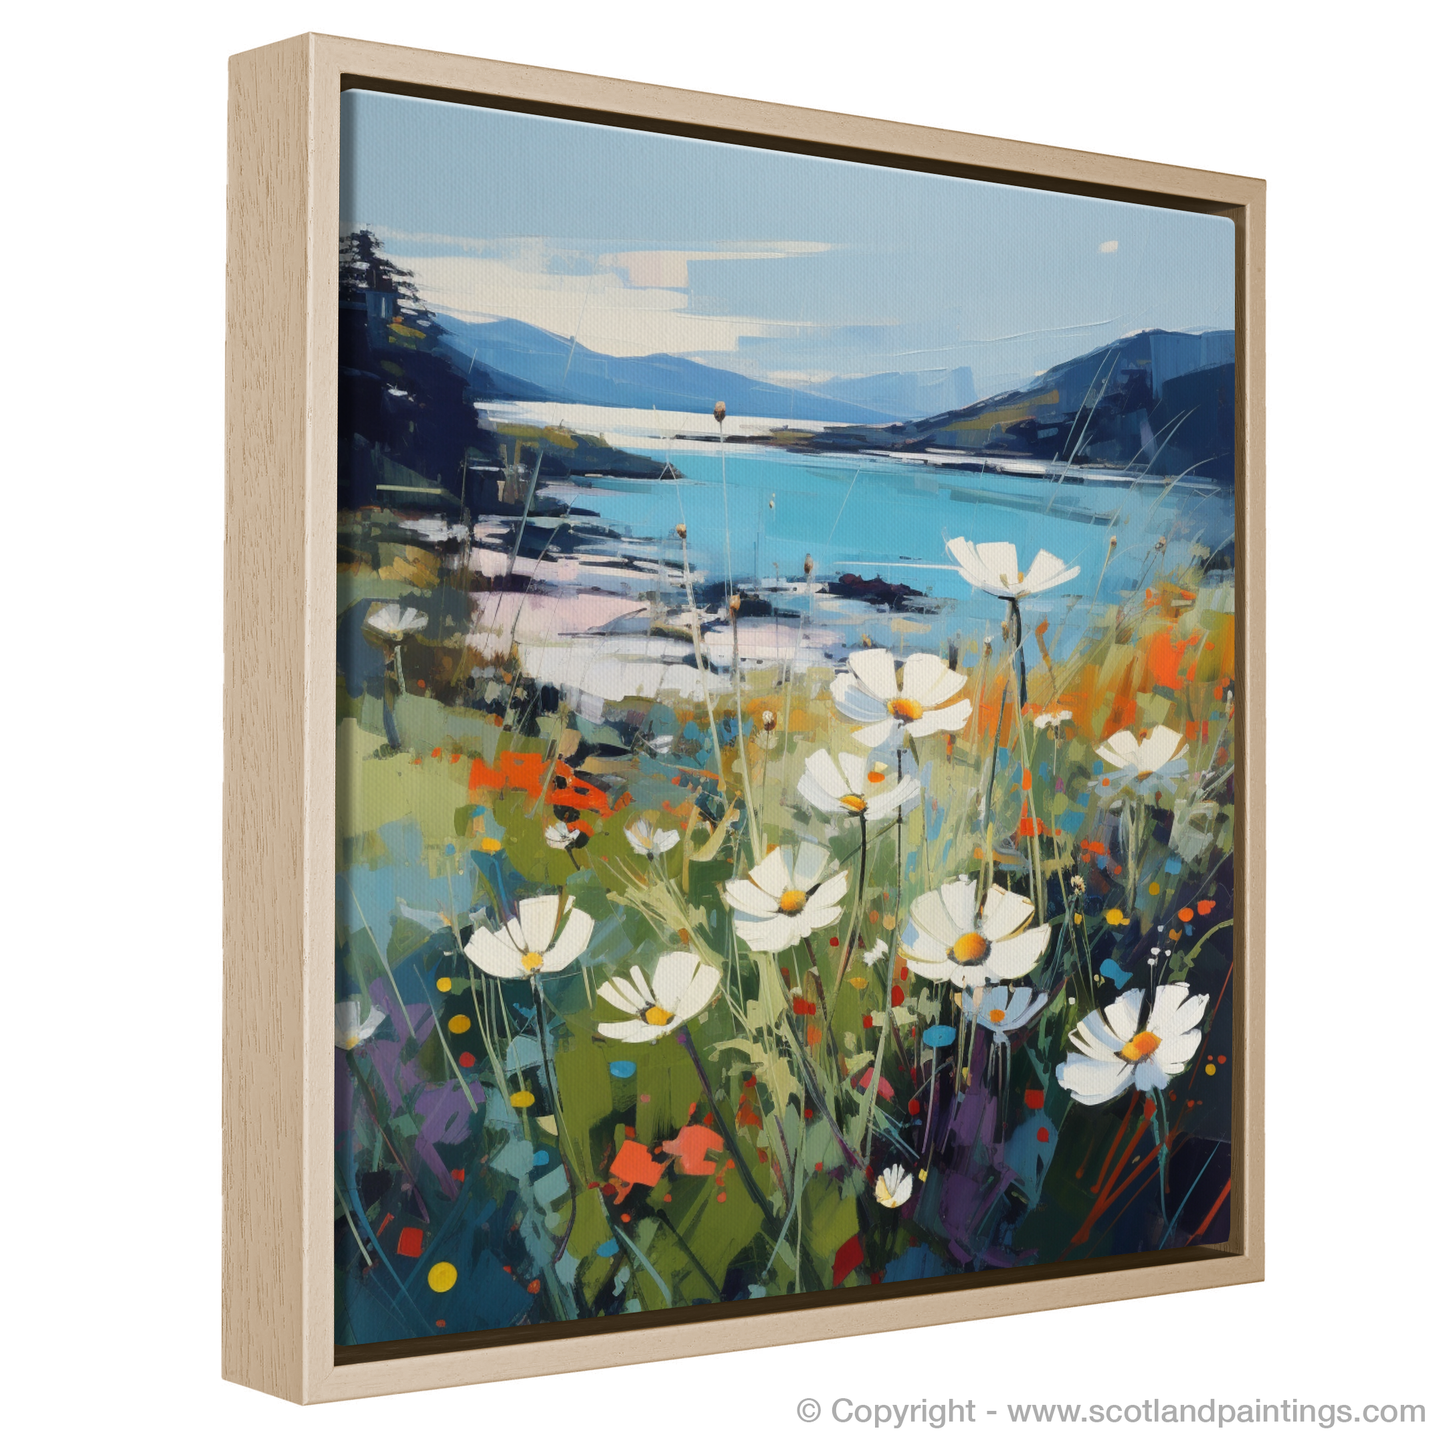 Painting and Art Print of Wildflowers by Loch Lomond entitled "Wildflowers by Loch Lomond: A Contemporary Ode to Natural Splendour".